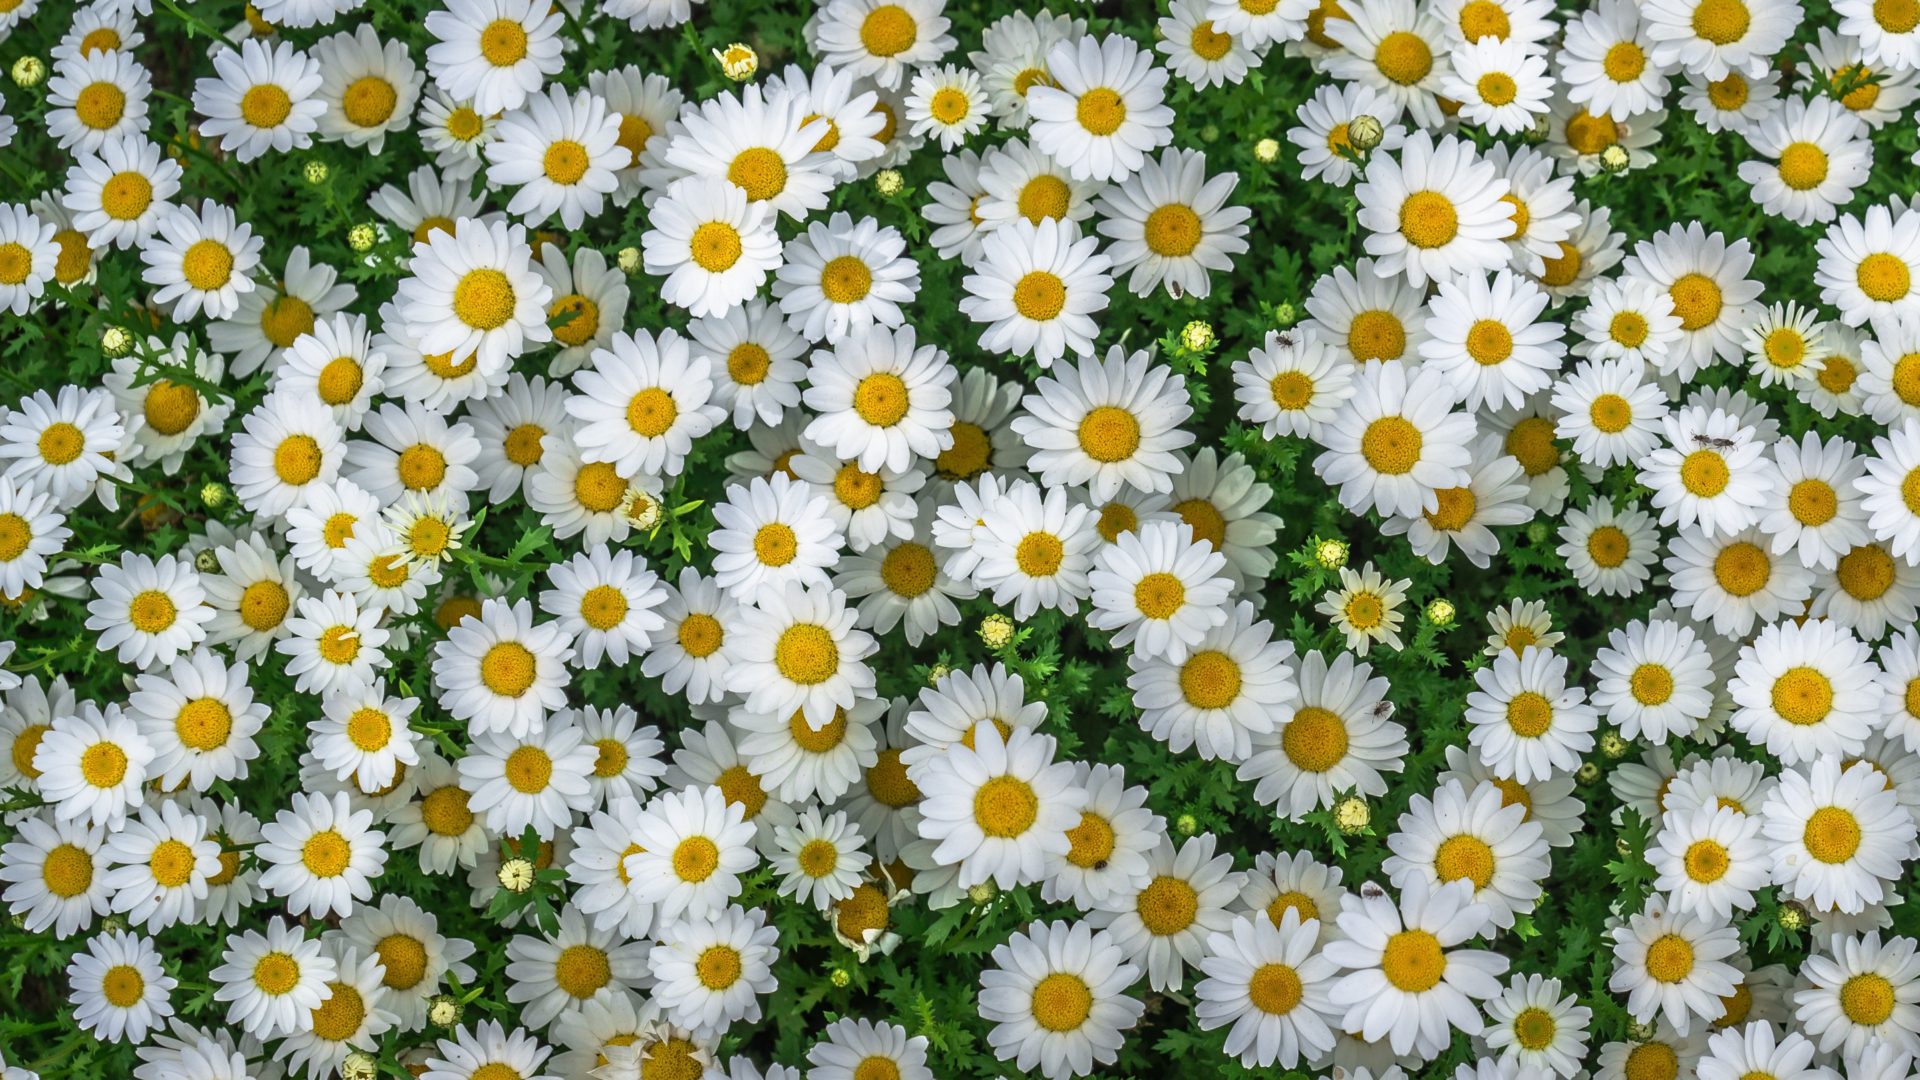 Chamomile Spring Marguerite Daisy Flowers Yellow White Flowers HD Wallpaper for mobile phones tablet and lapx2400, Wallpaper13.com